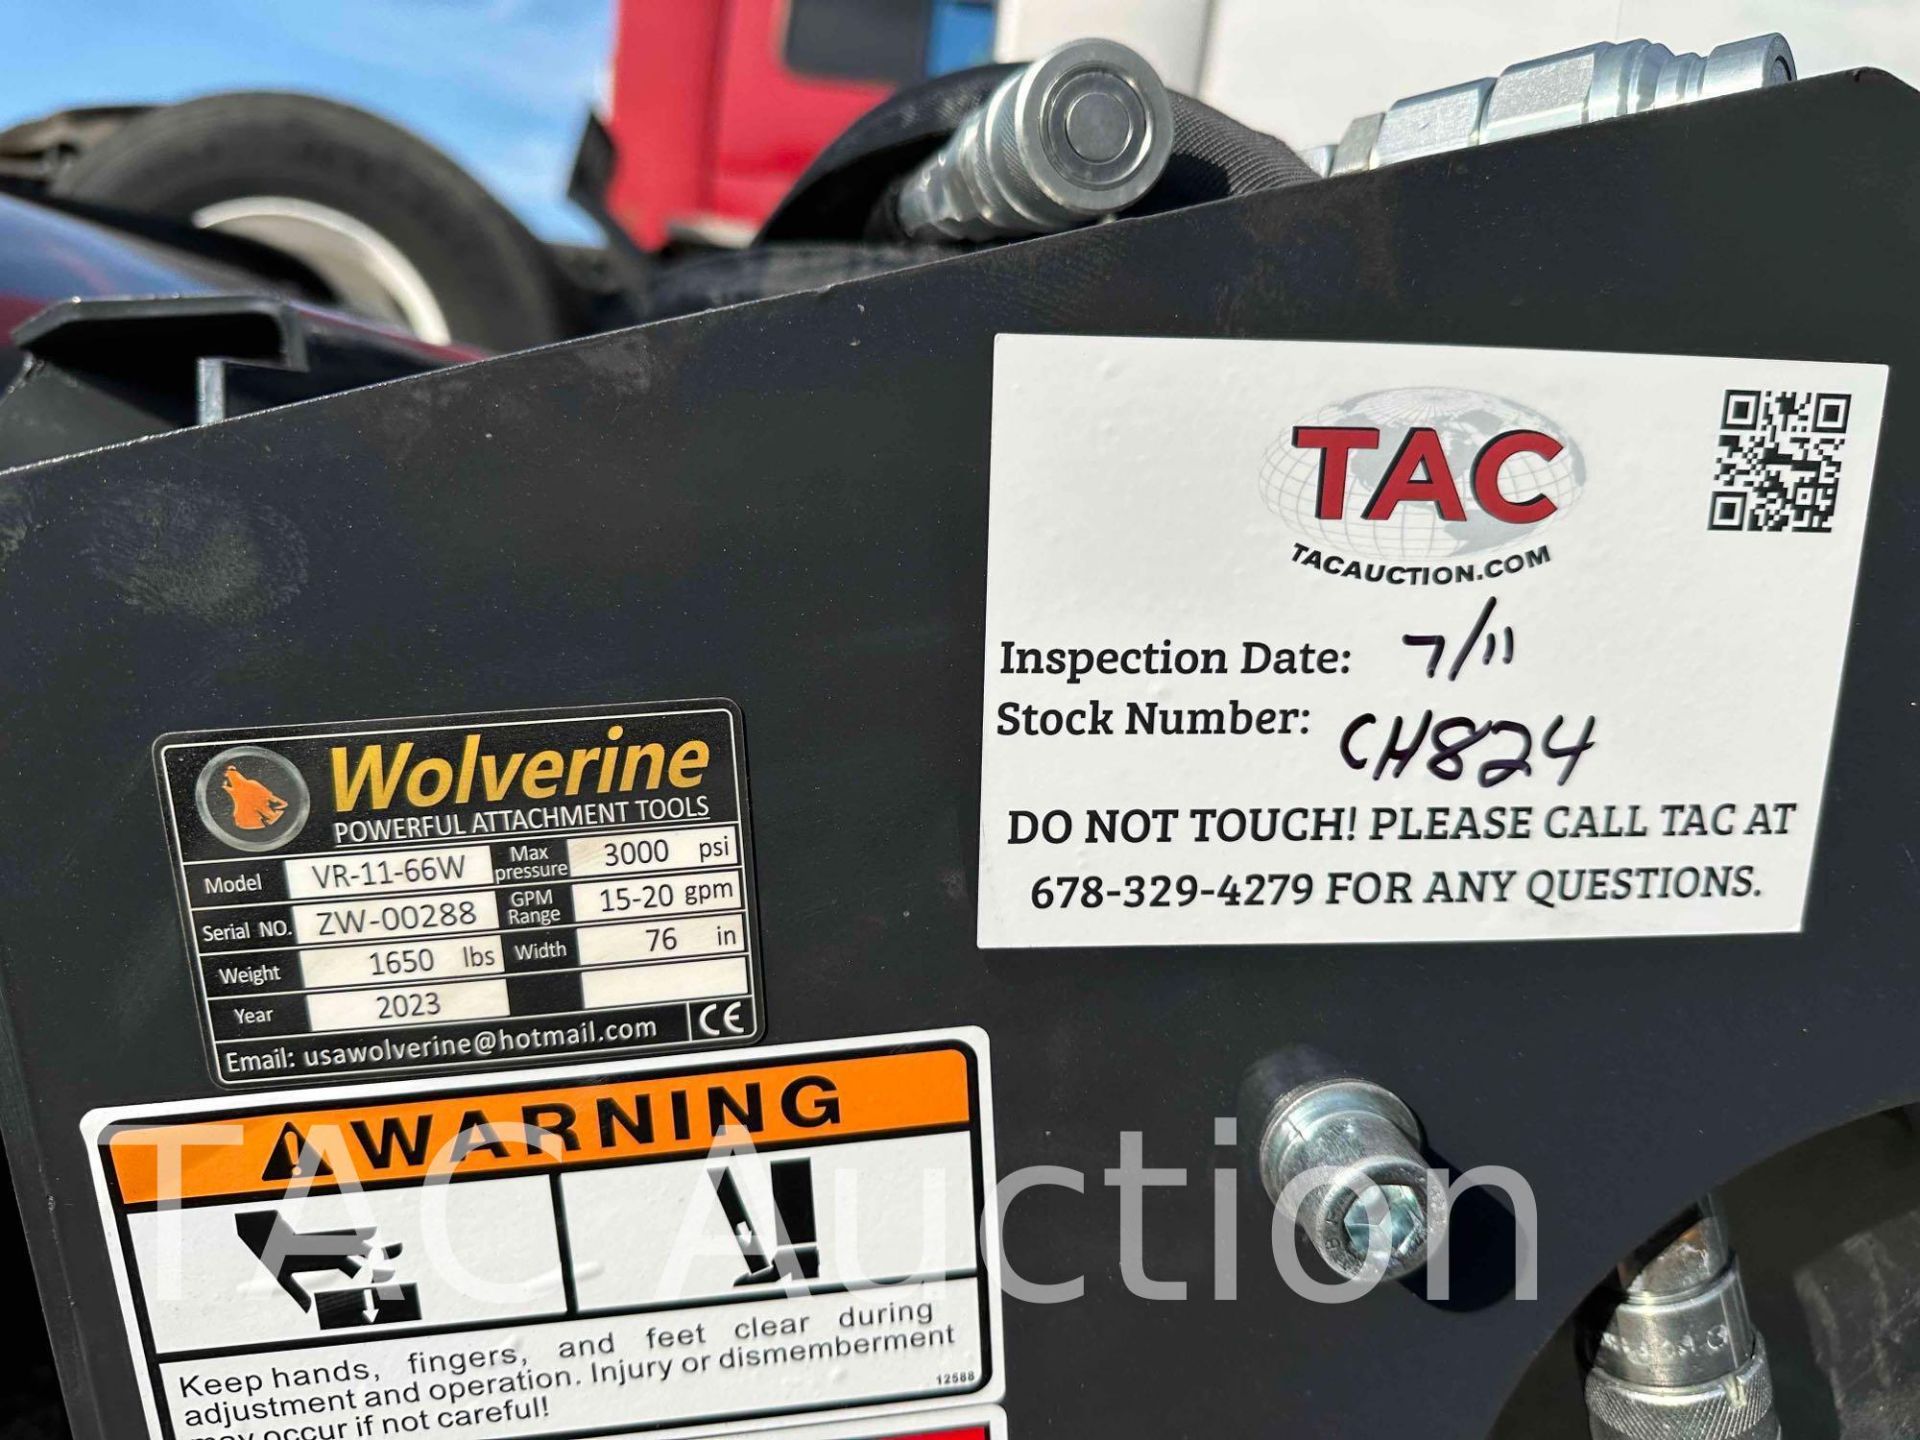 New 2023 Wolverine 76in Skid Steer Vibratory Roller Attachment - Image 4 of 4